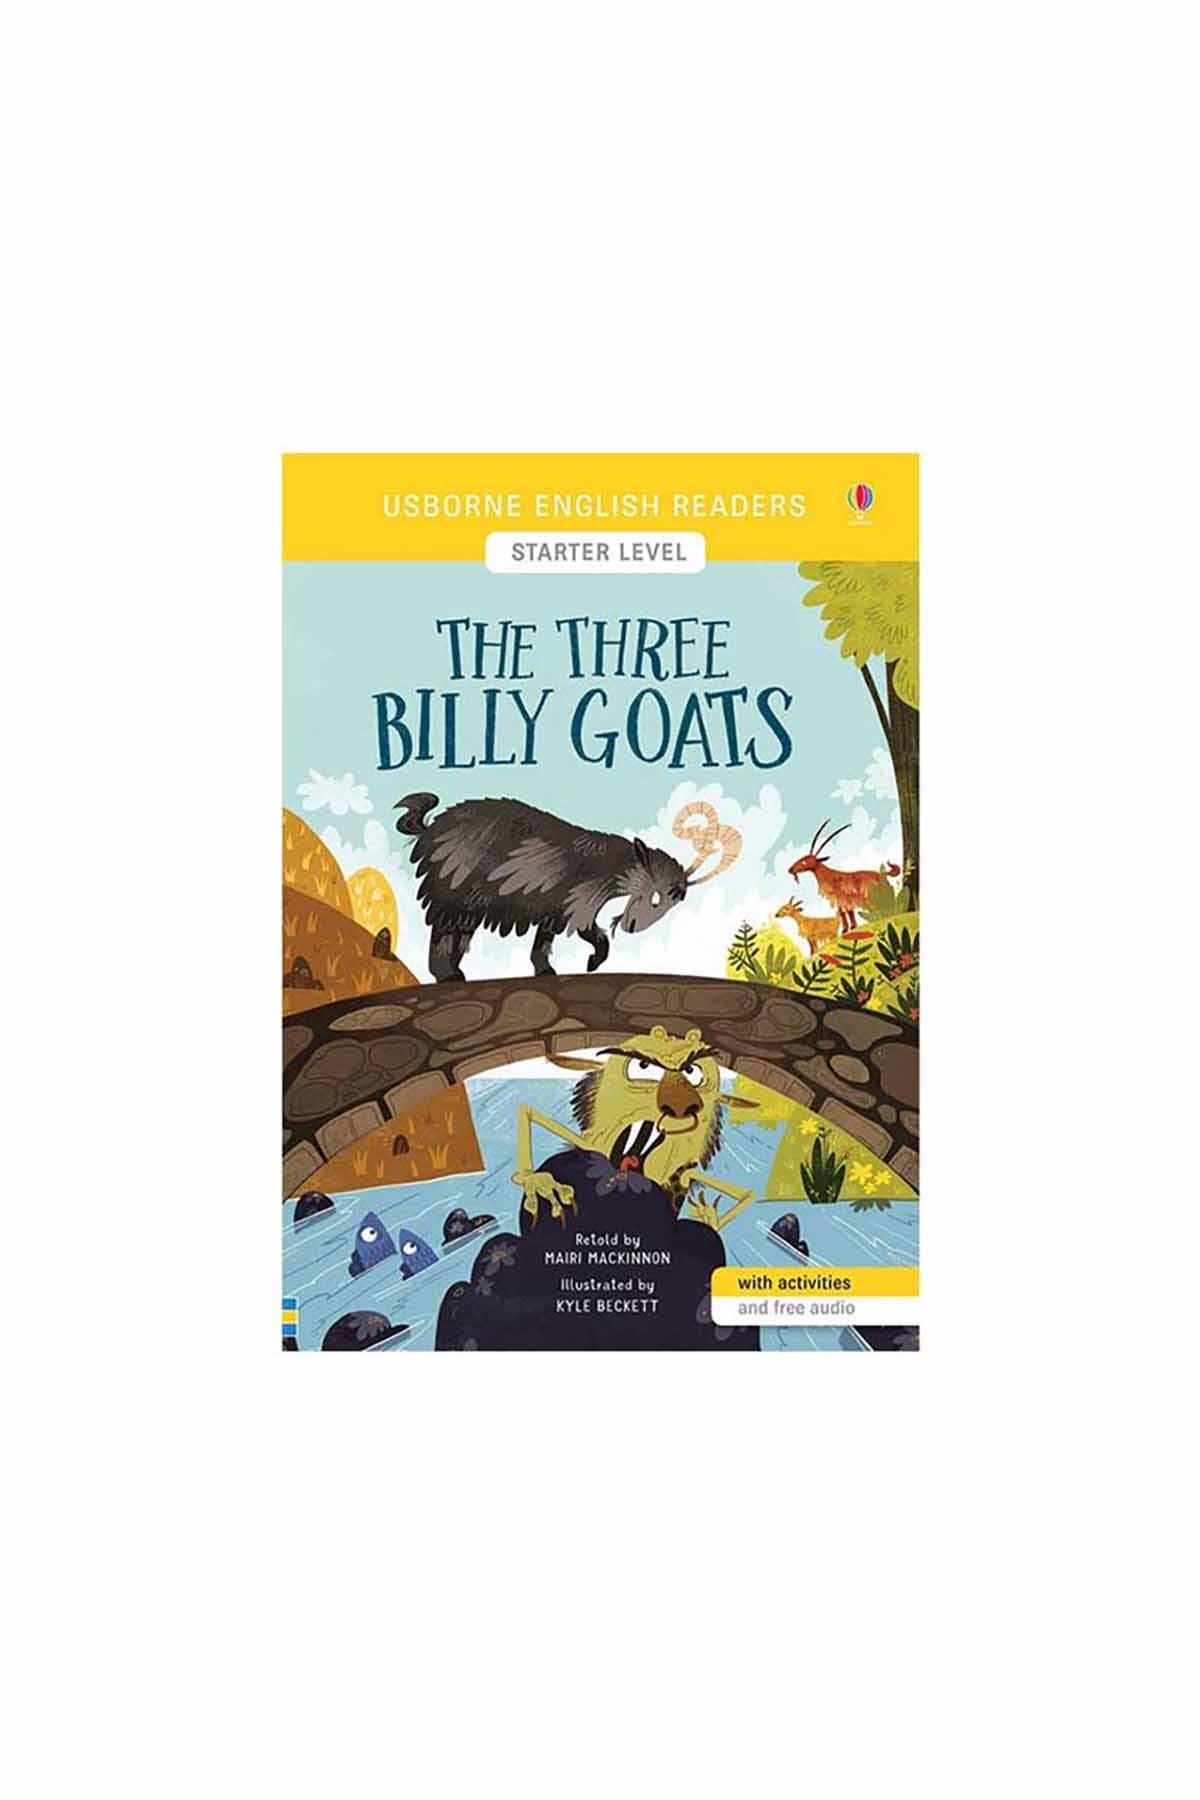 The Usborne The Three Billy Goats - English Readers Starter Level